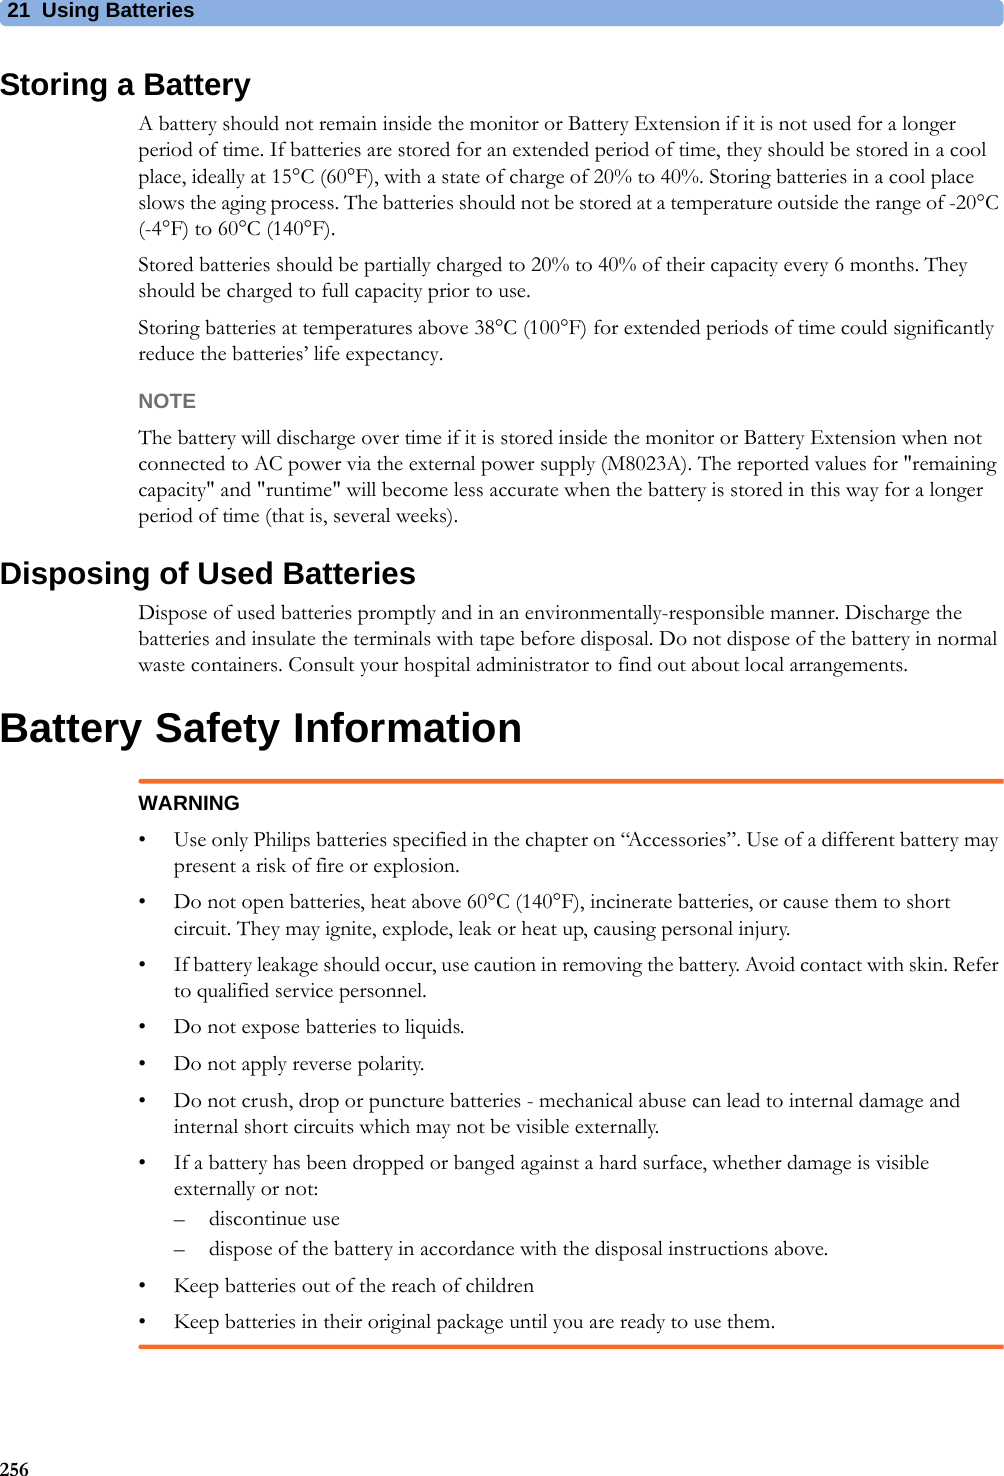 21 Using Batteries256Storing a BatteryA battery should not remain inside the monitor or Battery Extension if it is not used for a longer period of time. If batteries are stored for an extended period of time, they should be stored in a cool place, ideally at 15°C (60°F), with a state of charge of 20% to 40%. Storing batteries in a cool place slows the aging process. The batteries should not be stored at a temperature outside the range of -20°C (-4°F) to 60°C (140°F).Stored batteries should be partially charged to 20% to 40% of their capacity every 6 months. They should be charged to full capacity prior to use.Storing batteries at temperatures above 38°C (100°F) for extended periods of time could significantly reduce the batteries’ life expectancy.NOTEThe battery will discharge over time if it is stored inside the monitor or Battery Extension when not connected to AC power via the external power supply (M8023A). The reported values for &quot;remaining capacity&quot; and &quot;runtime&quot; will become less accurate when the battery is stored in this way for a longer period of time (that is, several weeks).Disposing of Used BatteriesDispose of used batteries promptly and in an environmentally-responsible manner. Discharge the batteries and insulate the terminals with tape before disposal. Do not dispose of the battery in normal waste containers. Consult your hospital administrator to find out about local arrangements.Battery Safety InformationWARNING• Use only Philips batteries specified in the chapter on “Accessories”. Use of a different battery may present a risk of fire or explosion.• Do not open batteries, heat above 60°C (140°F), incinerate batteries, or cause them to short circuit. They may ignite, explode, leak or heat up, causing personal injury.• If battery leakage should occur, use caution in removing the battery. Avoid contact with skin. Refer to qualified service personnel.• Do not expose batteries to liquids.• Do not apply reverse polarity.• Do not crush, drop or puncture batteries - mechanical abuse can lead to internal damage and internal short circuits which may not be visible externally.• If a battery has been dropped or banged against a hard surface, whether damage is visible externally or not:– discontinue use– dispose of the battery in accordance with the disposal instructions above.• Keep batteries out of the reach of children • Keep batteries in their original package until you are ready to use them.